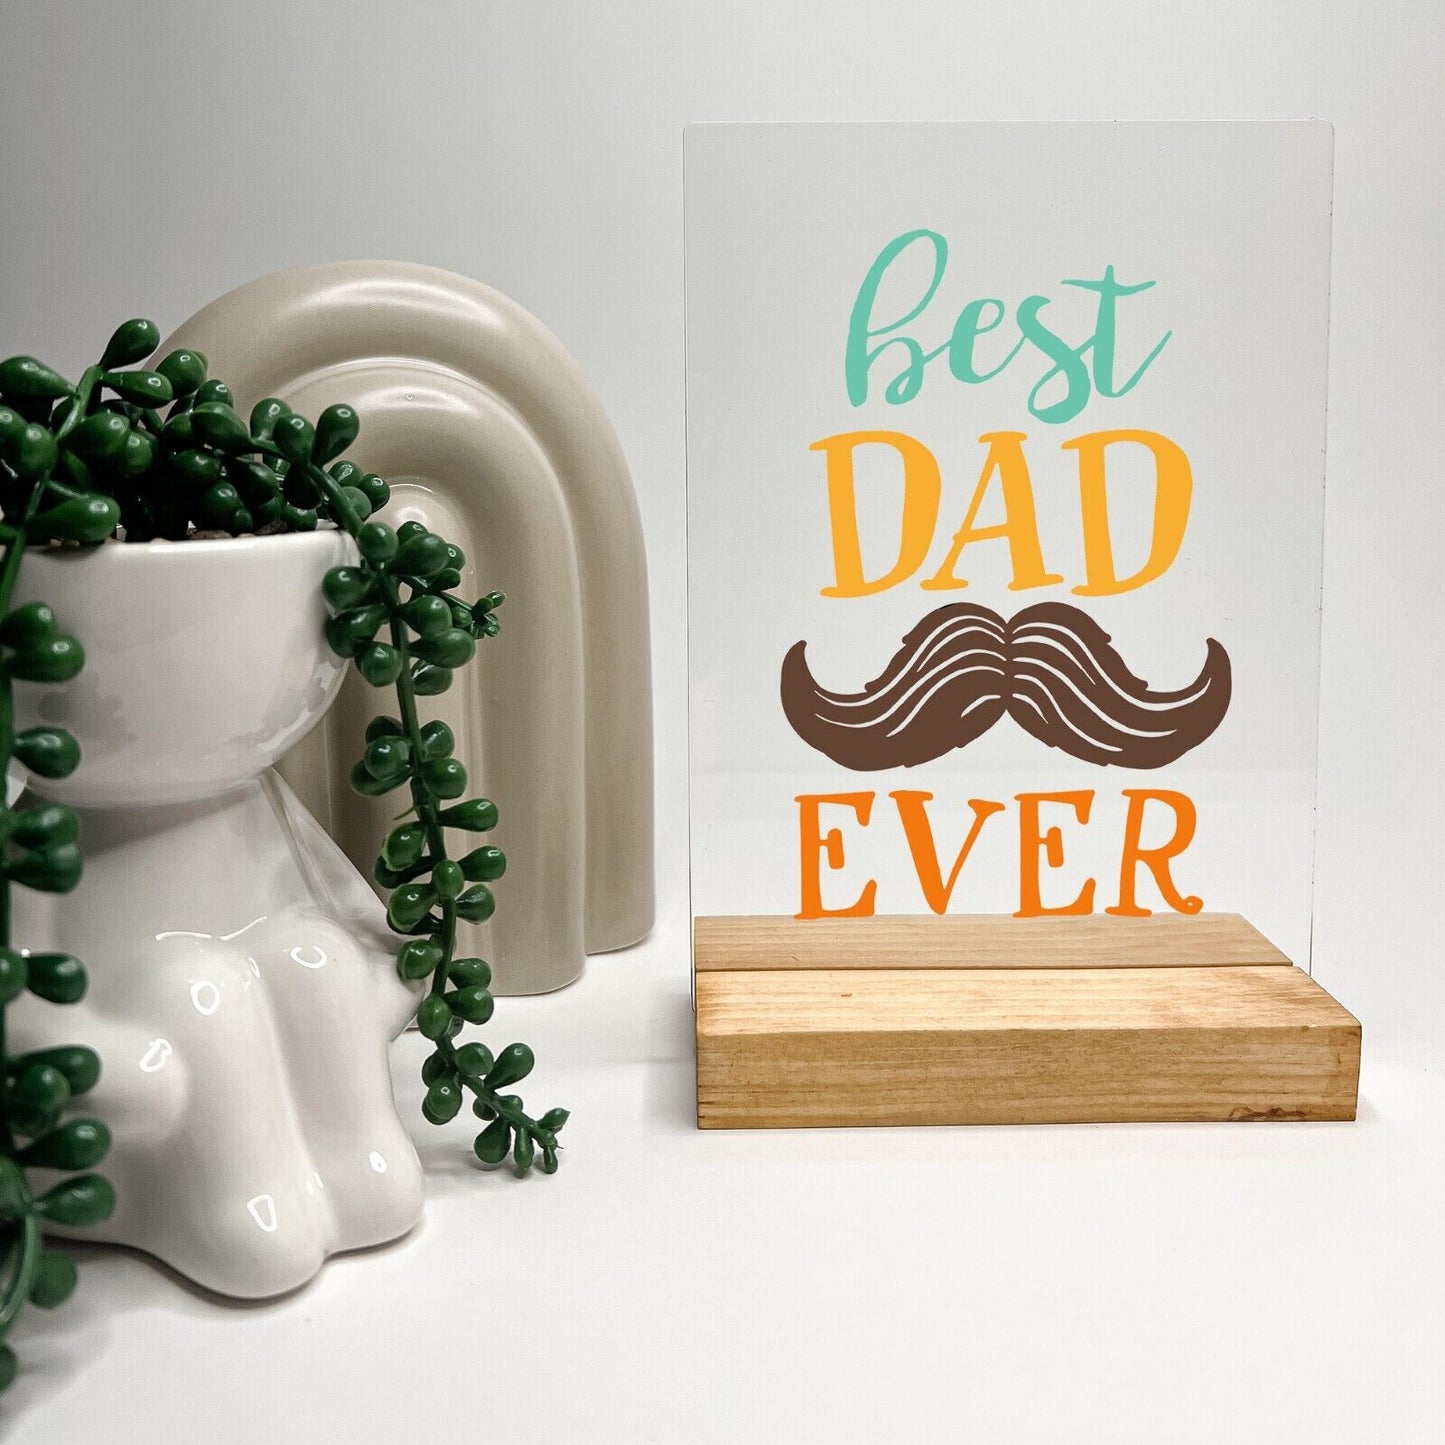 Personalized Wood Base Desk Table Stand Father's Day Best Dad Fishing Beard Gift